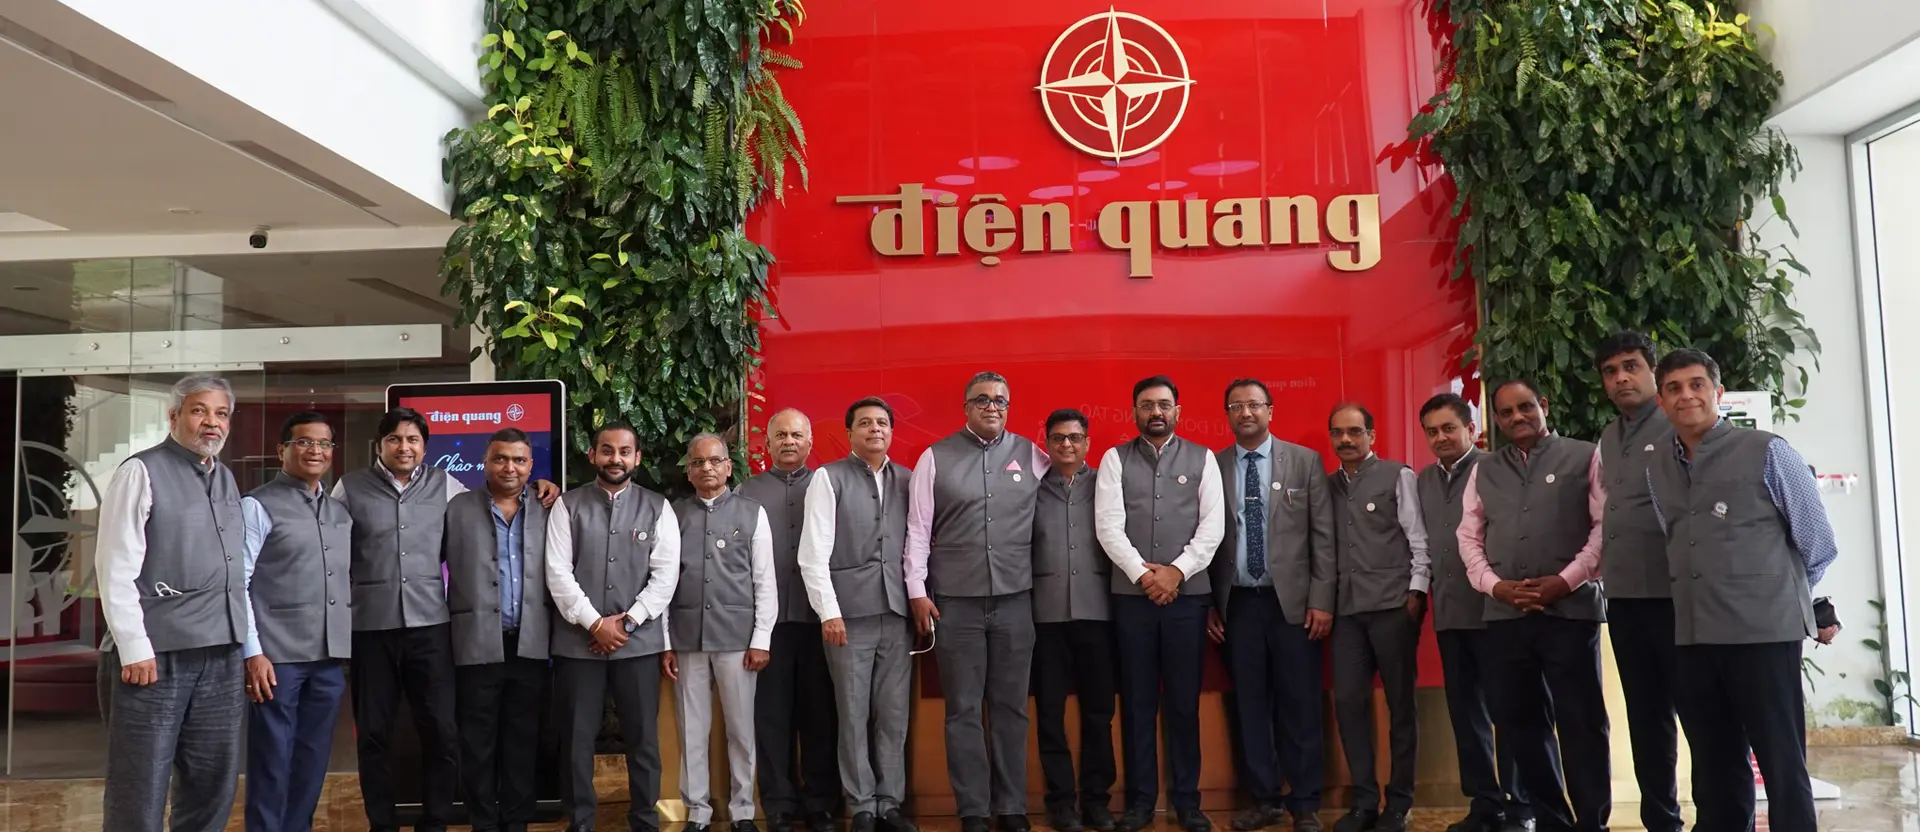 Mr. Nevil Sanghvi at the Vietnam delegation visit along with other Bombay Industries Association BIA members